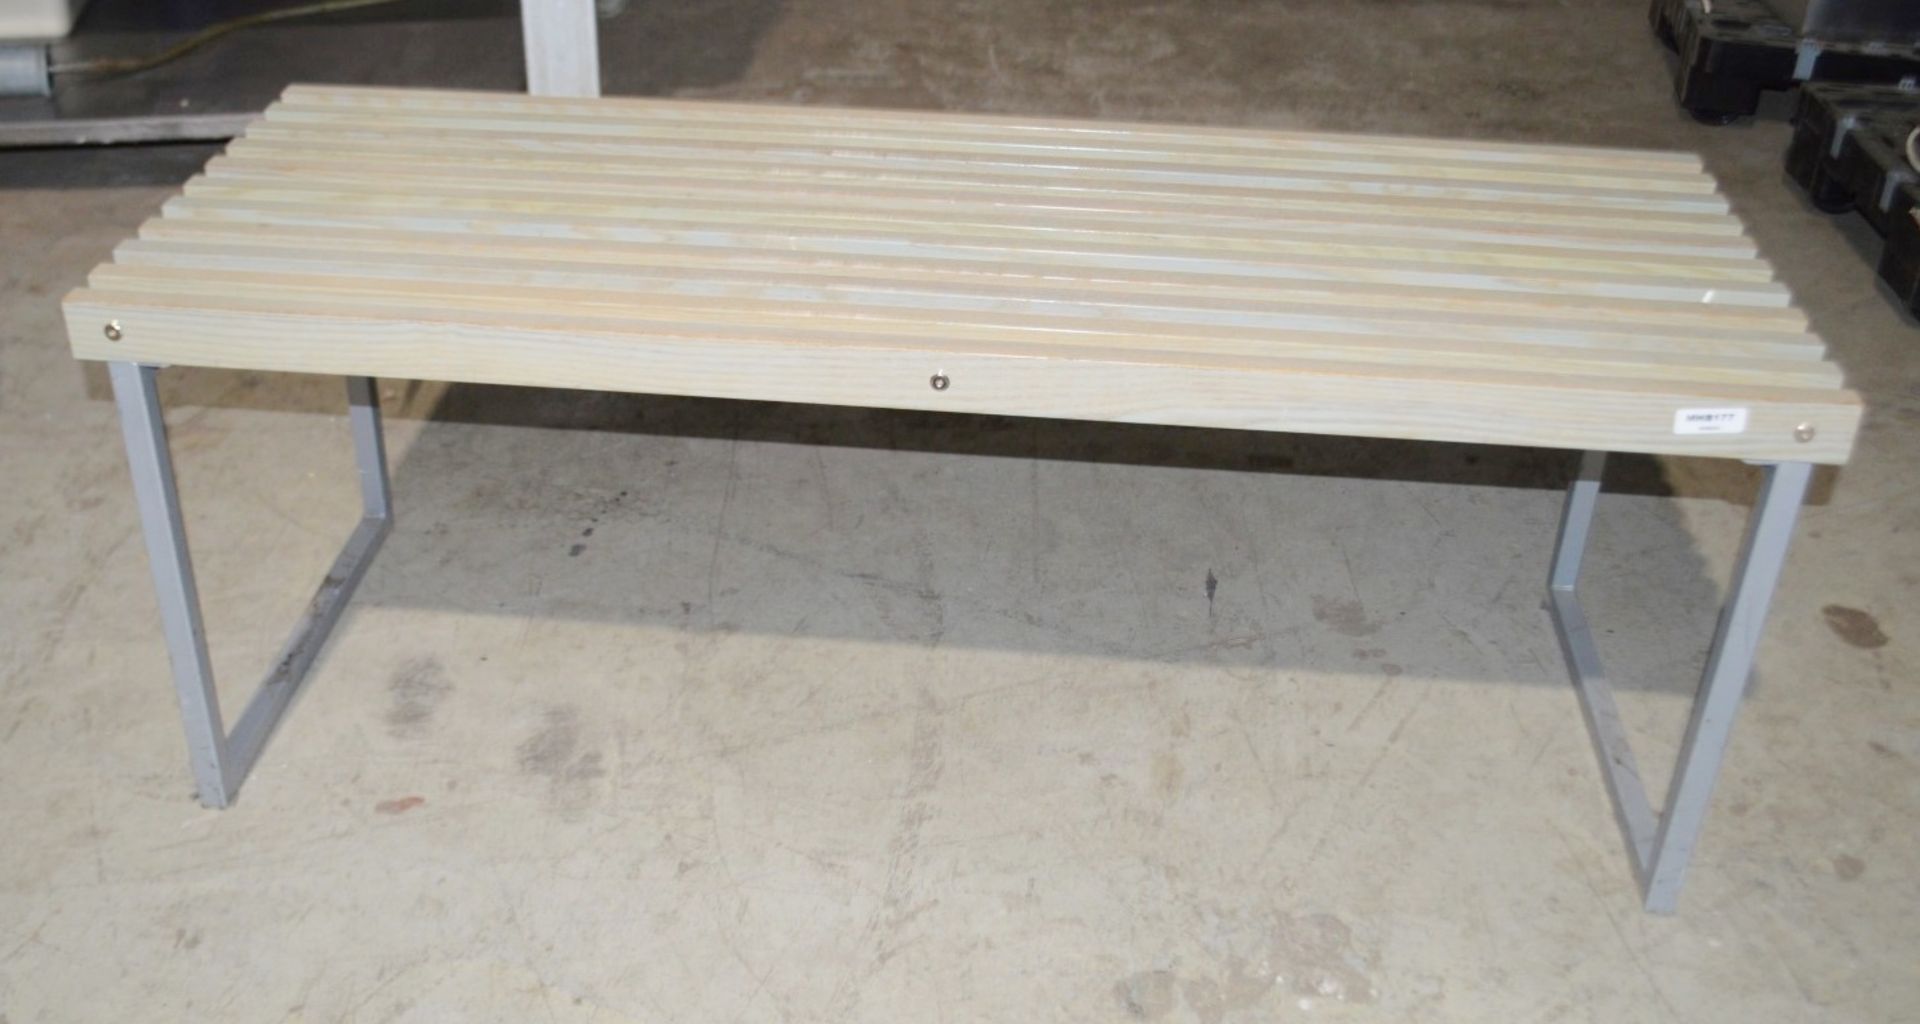 1 x Department Store Bench With Wooden Beams In A Limed Oak Finish - Dimensions: W135 x D50 x